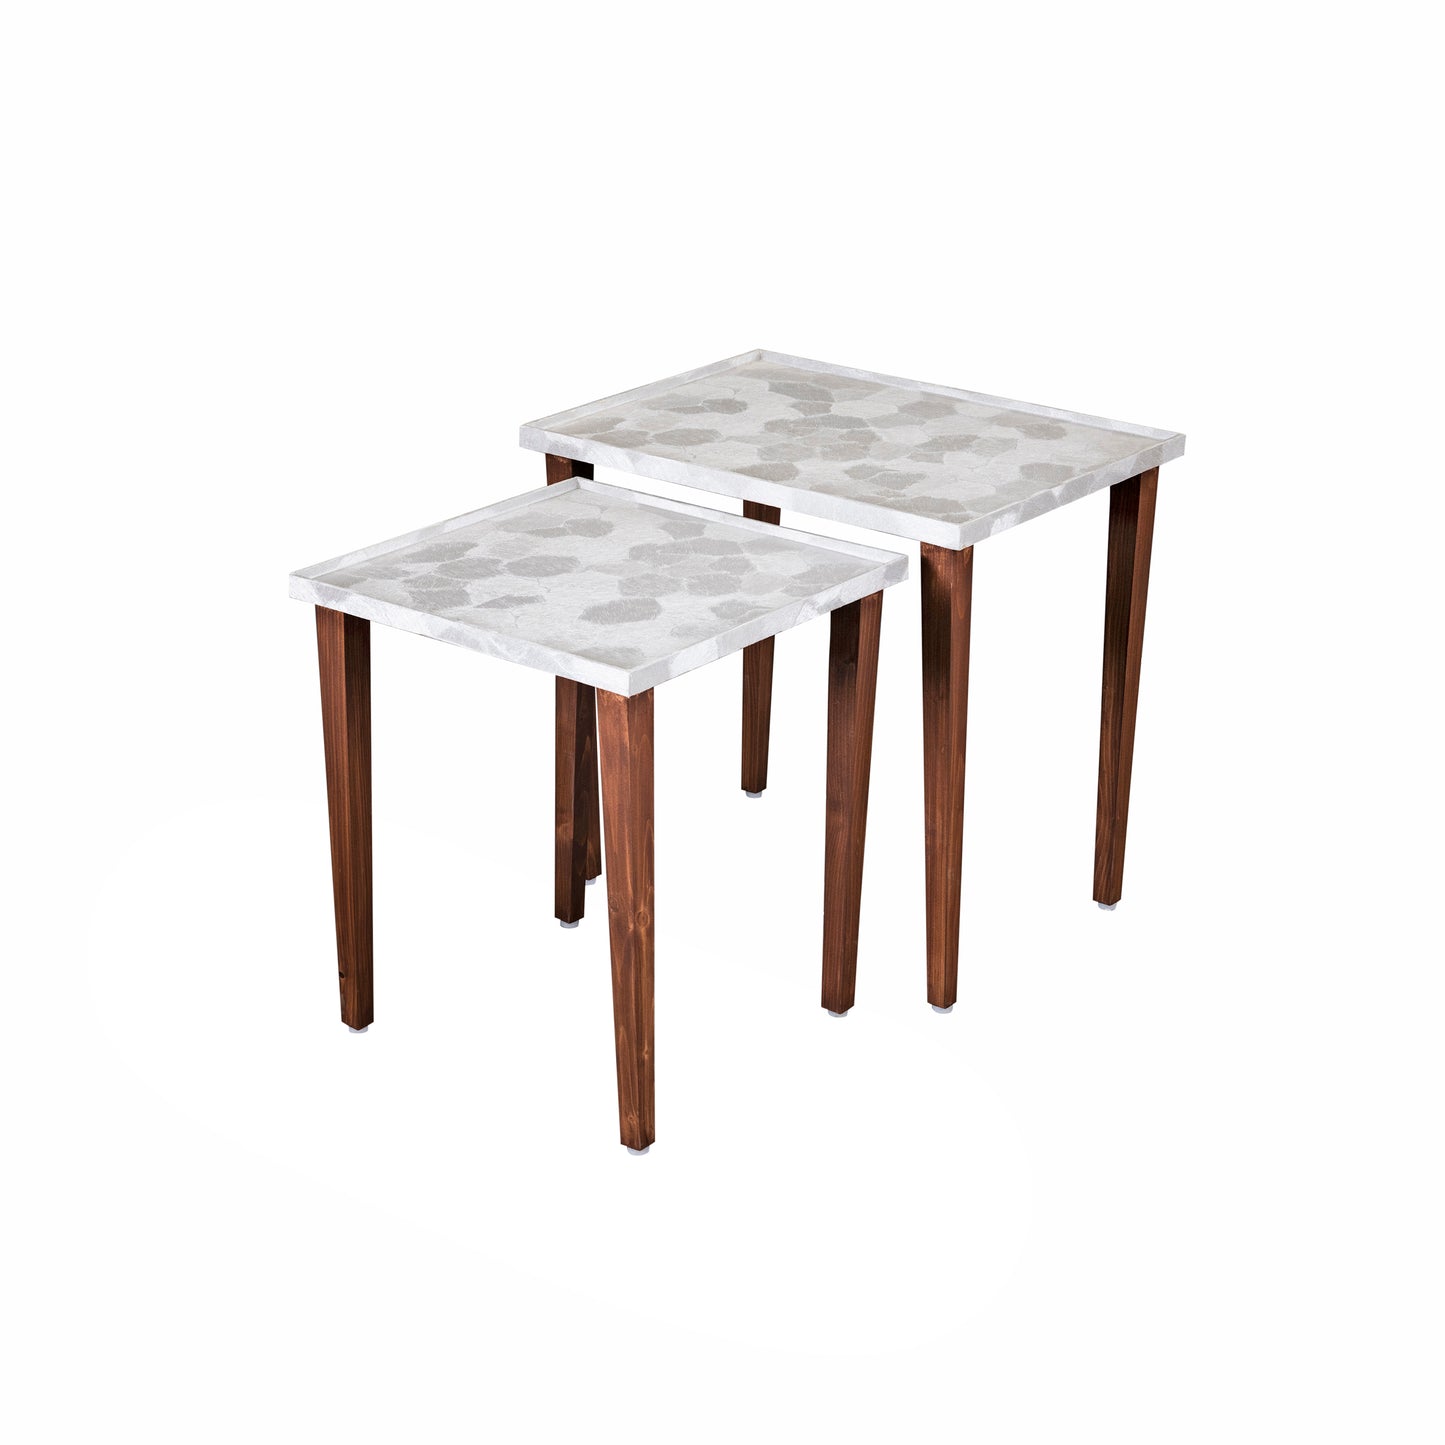 A Tiny Mistake Allure Silver Wooden Rectangle Nesting Tables (Set of 2), Living Room Decor